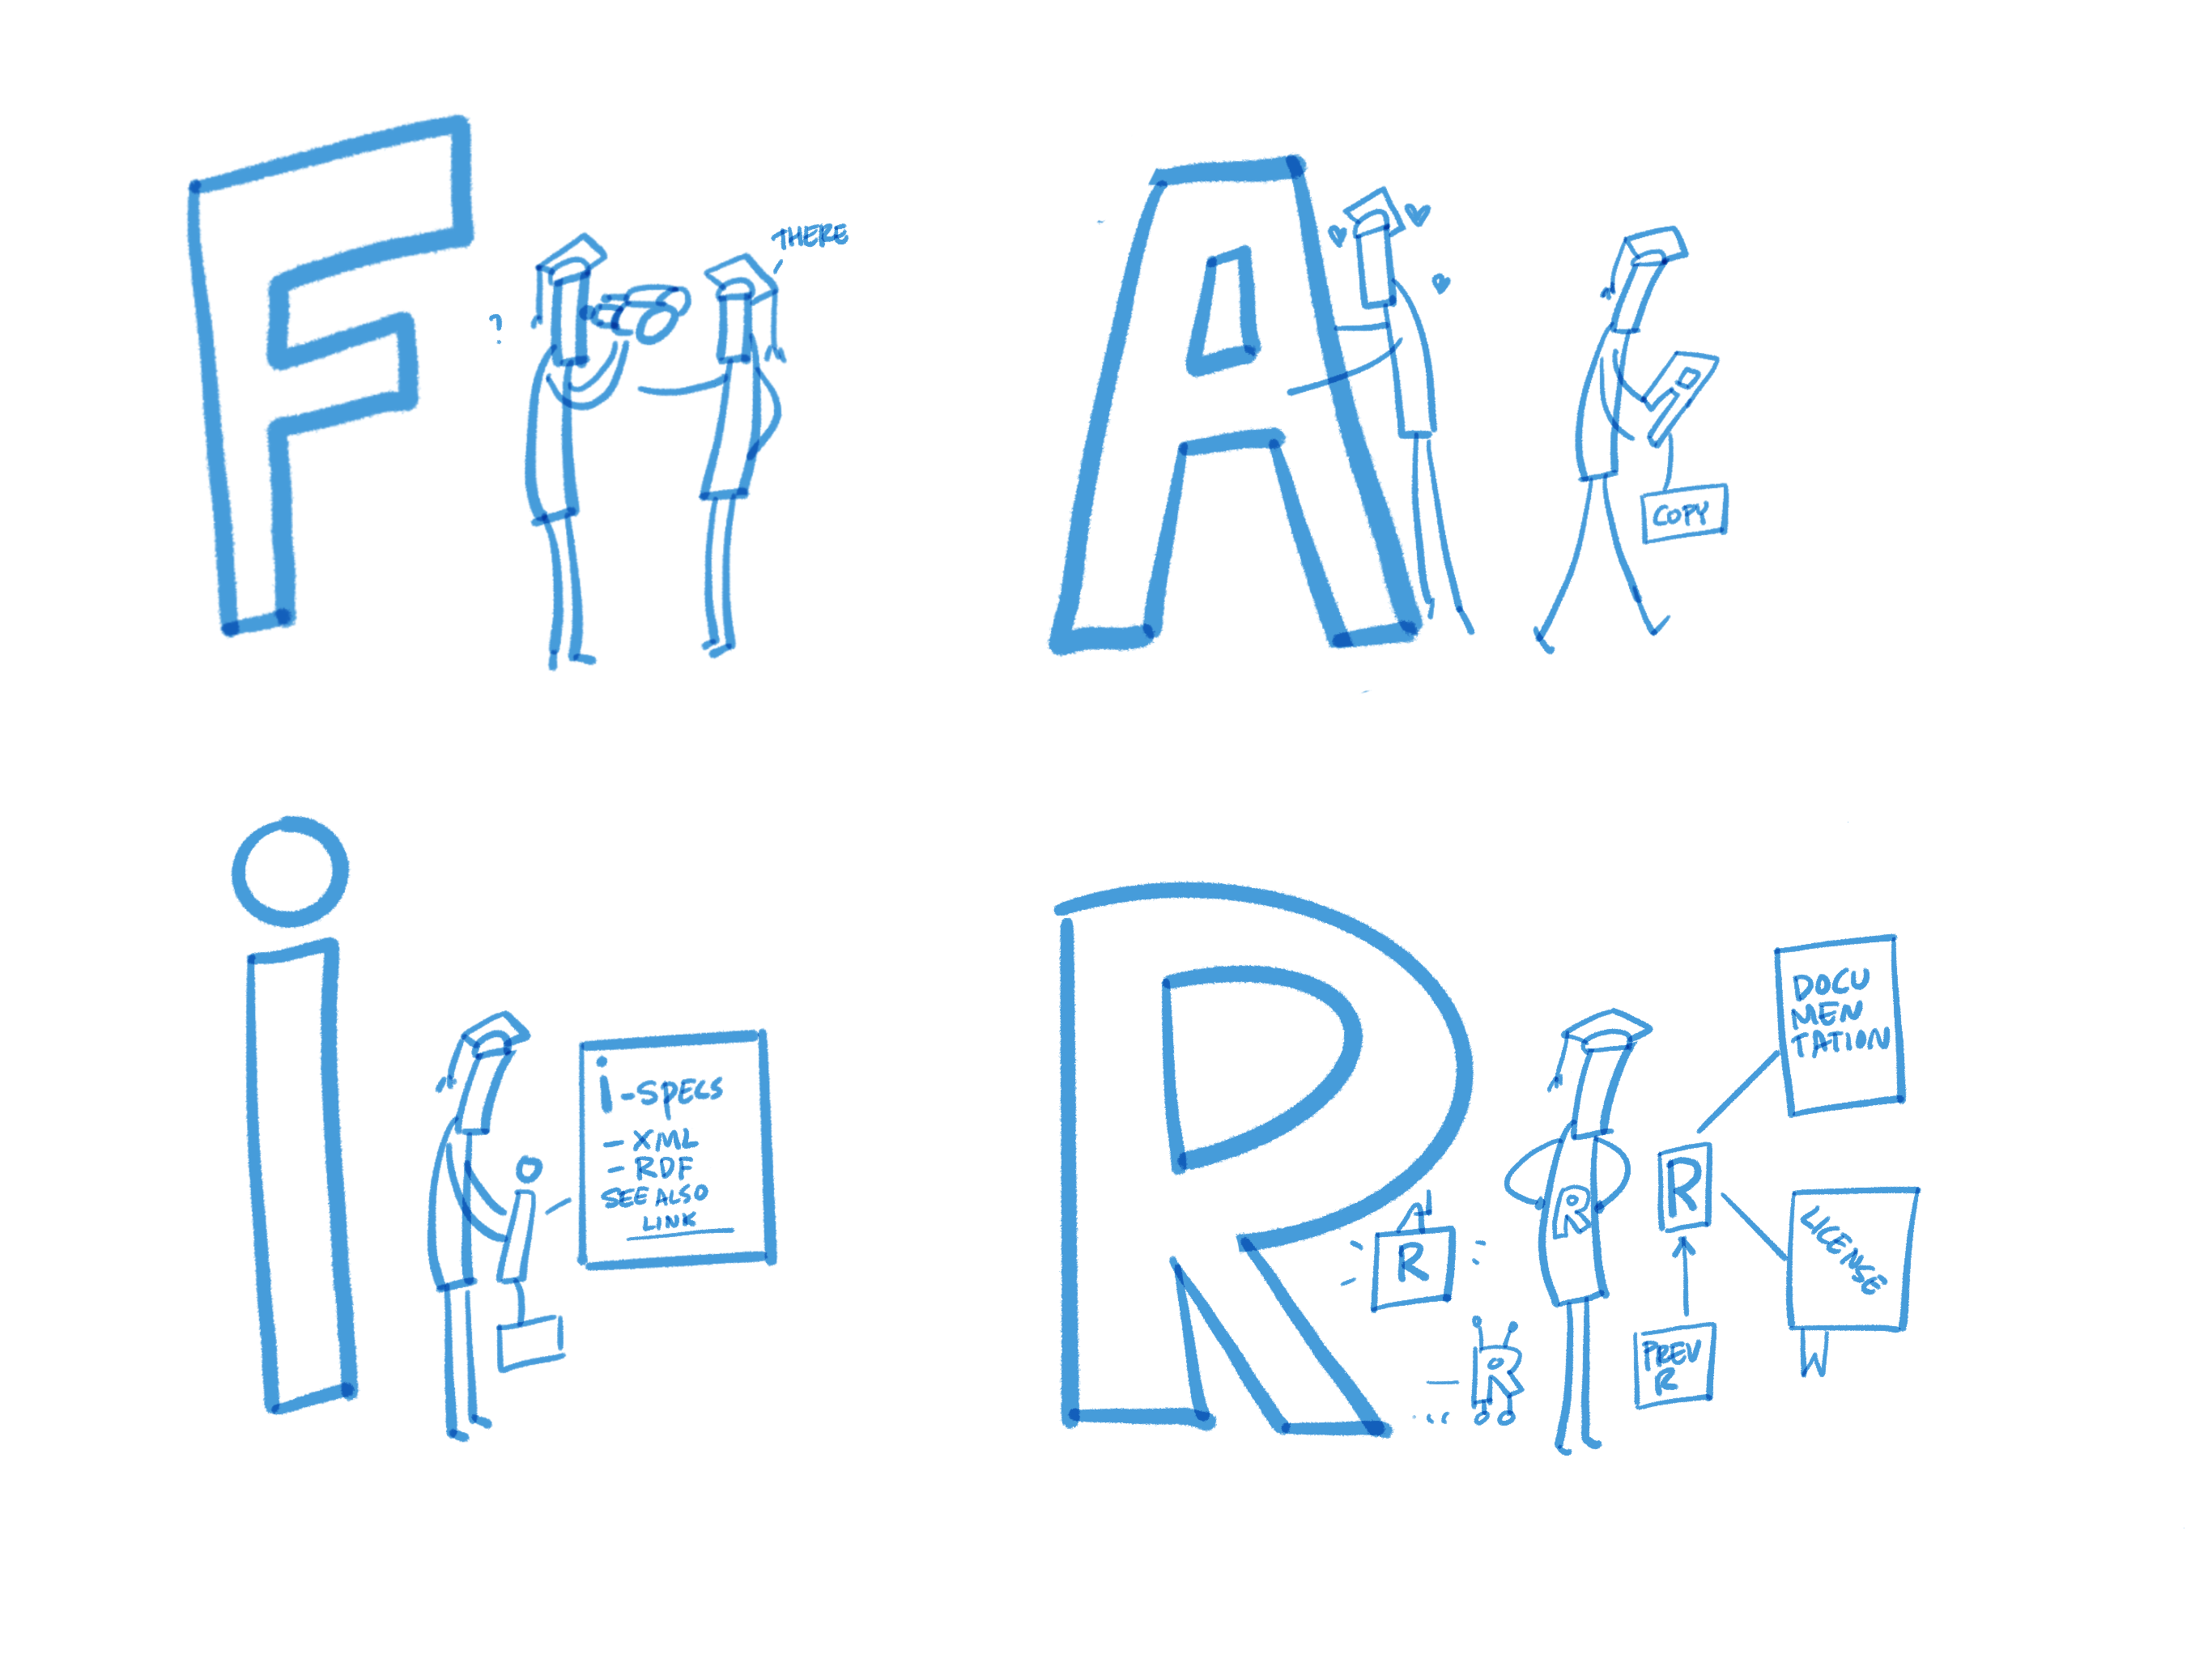 Stick figure students point at large capital letters spelling out FAIR